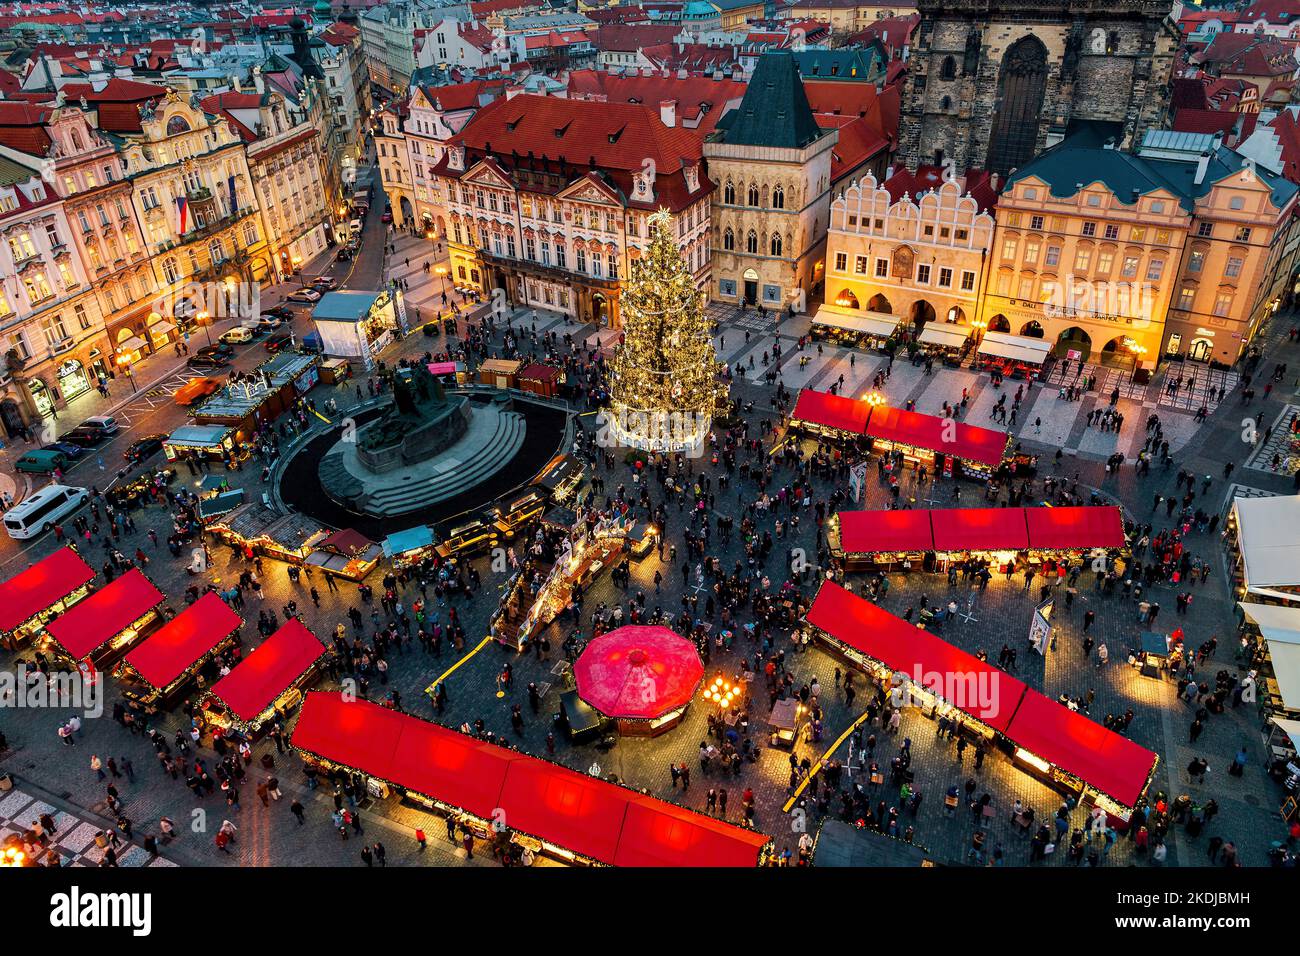 View from above of illuminated Christmas tree, market kiosks with red roofs and people on Old Town Square in Prague, Czechia. Stock Photo